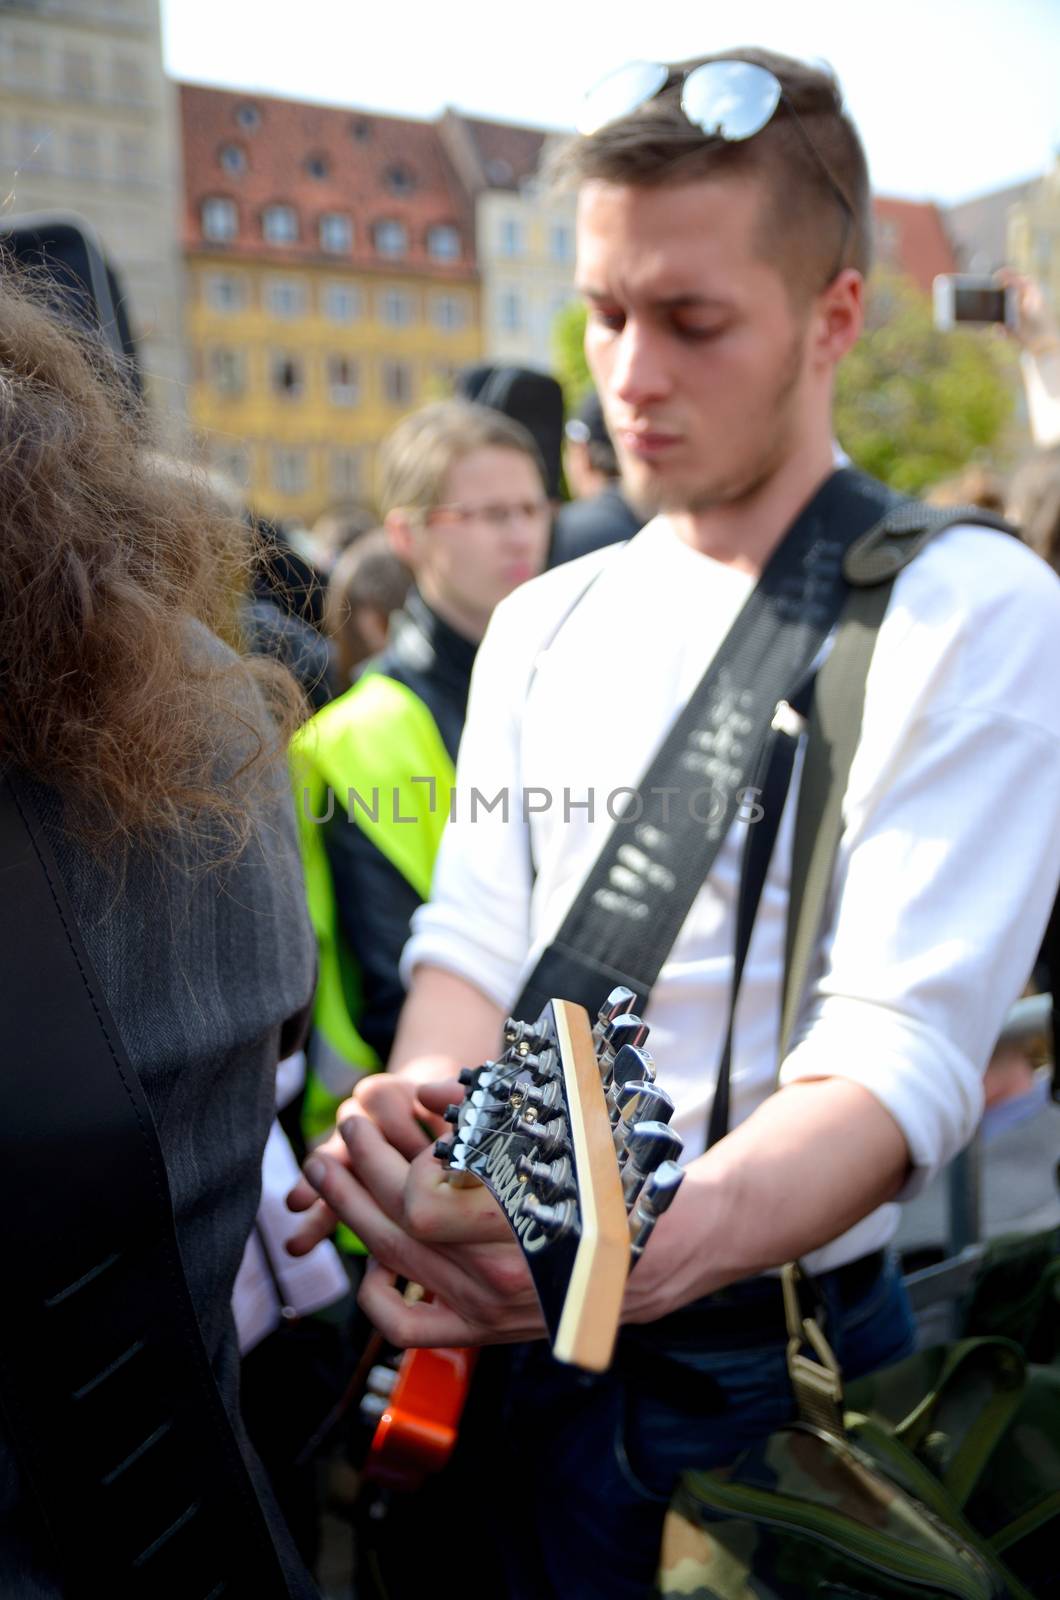 WROCLAW, POLAND - MAY 1: Unidentified guitarist plays Hey Joe during Thanks Jimi Festival on 1st May 2016 in Wroclaw, Poland.